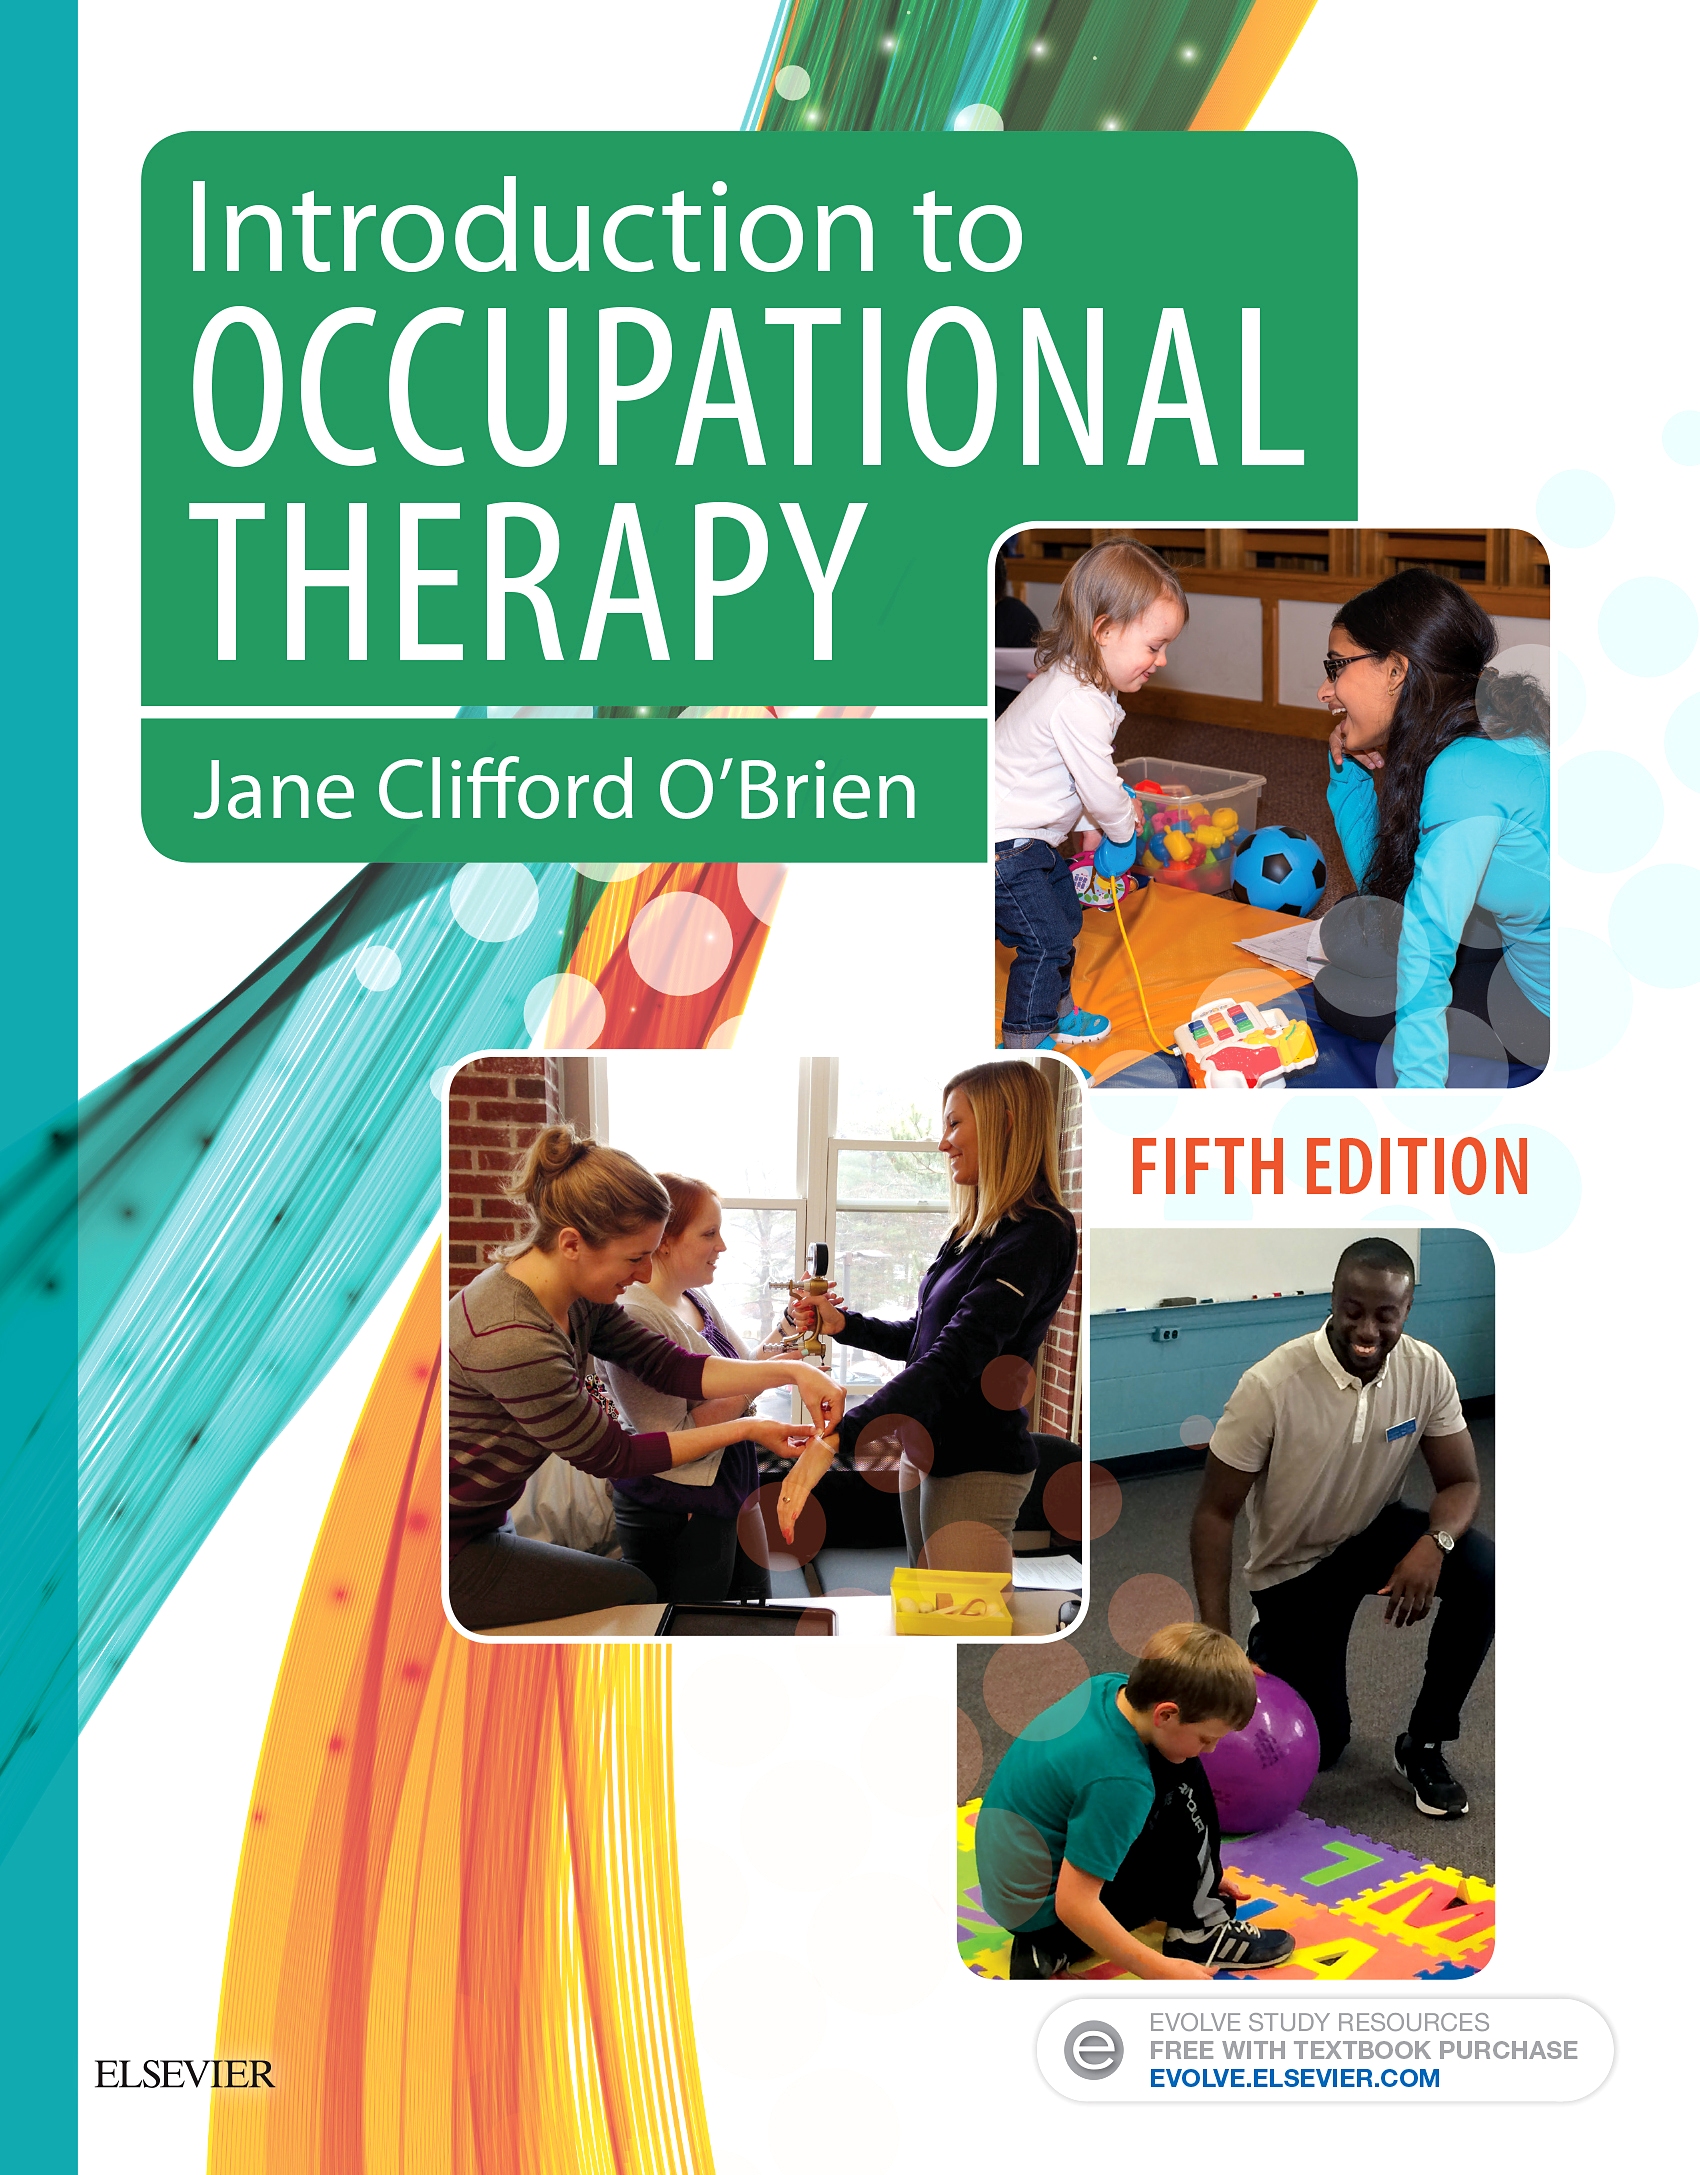 Evolve Resources for Introduction to Occupational Therapy, 5th